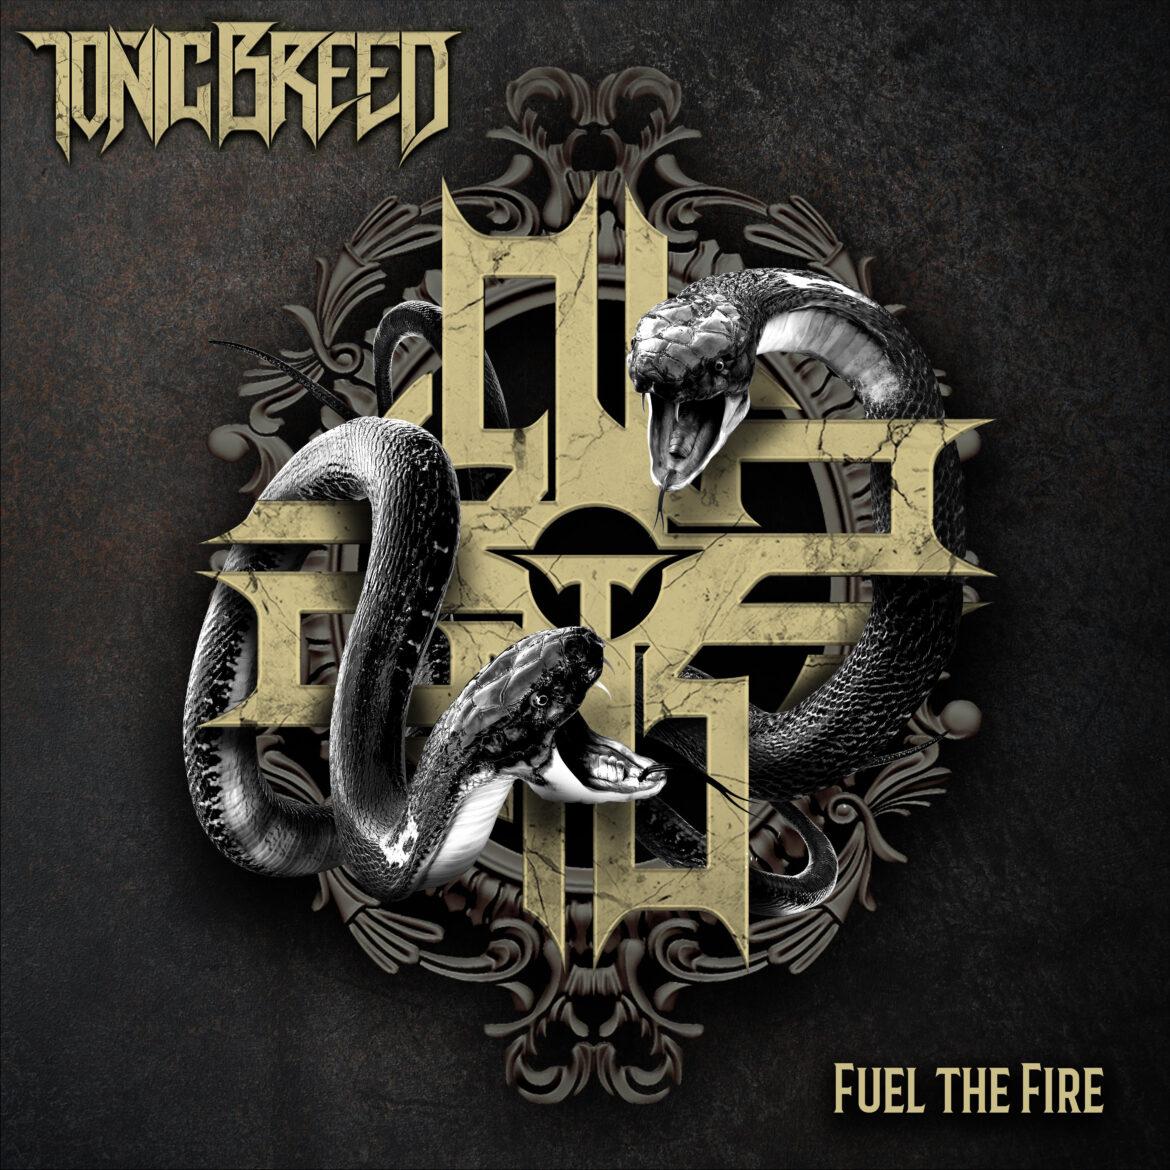 TONIC BREED – Debut New Music Video